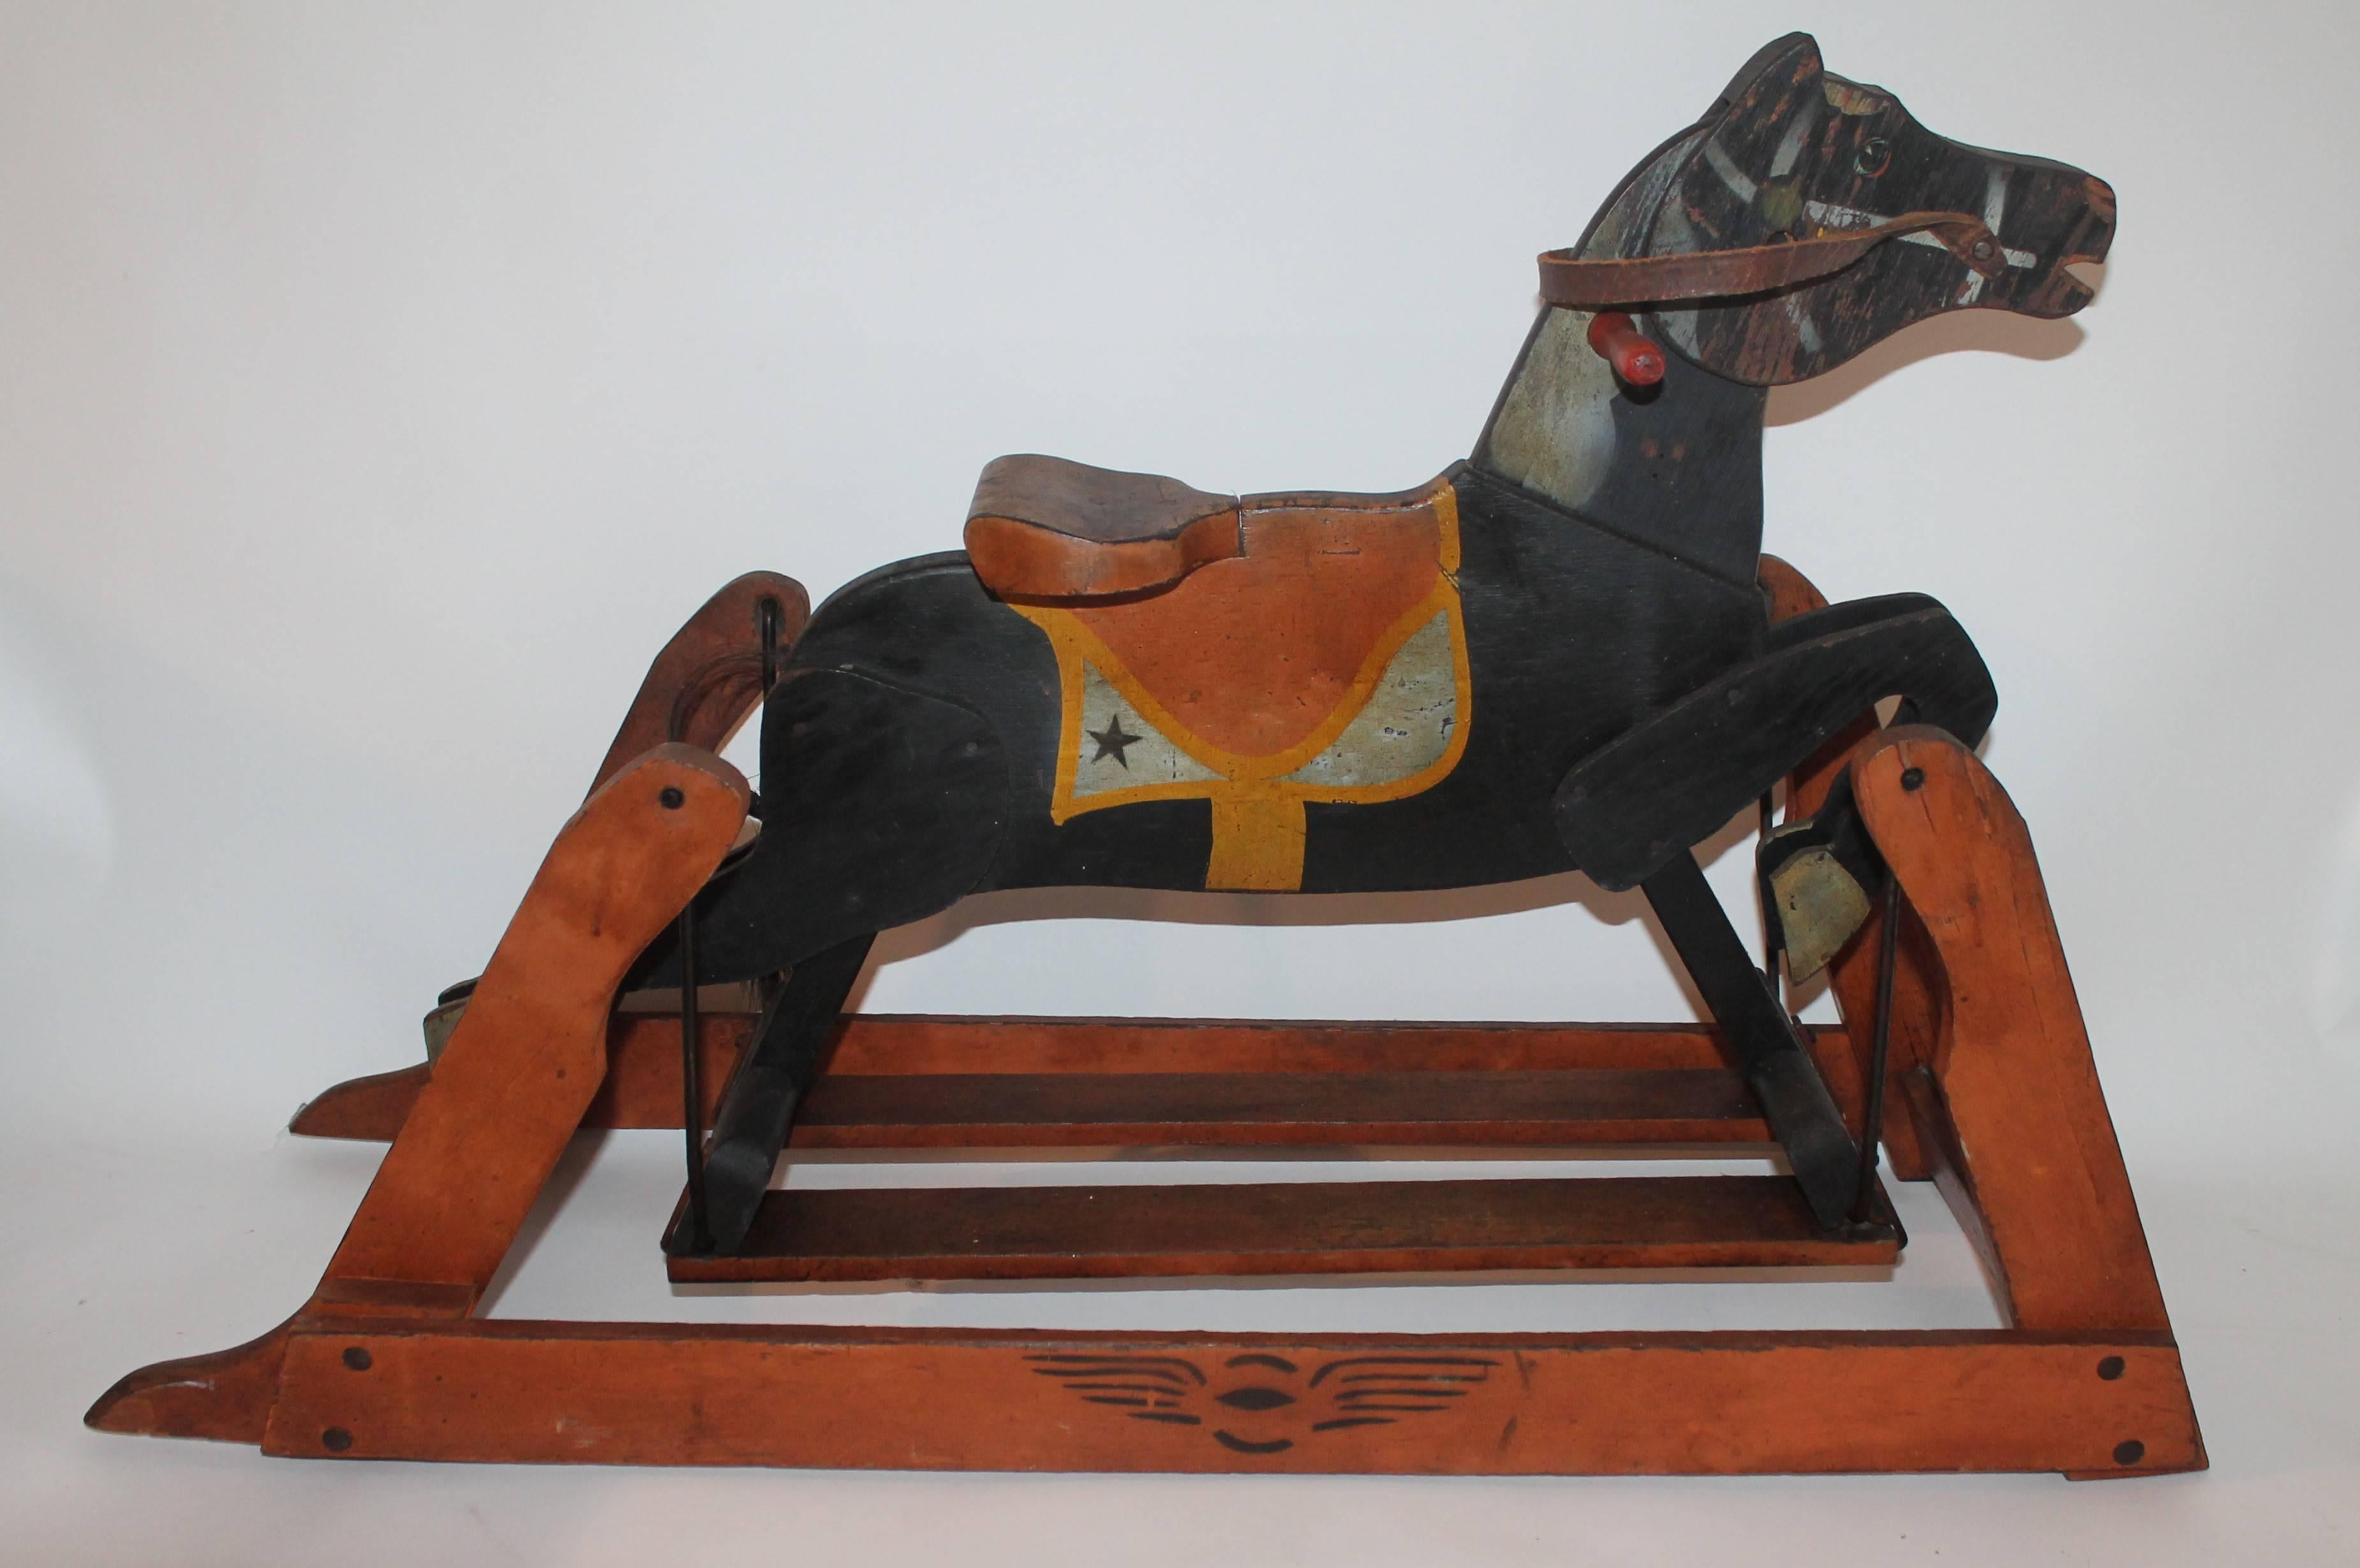 This painted salmon and black original painted rocking or platform horse has the very best painted surface. Great for table top or on cupboard. Super patina.